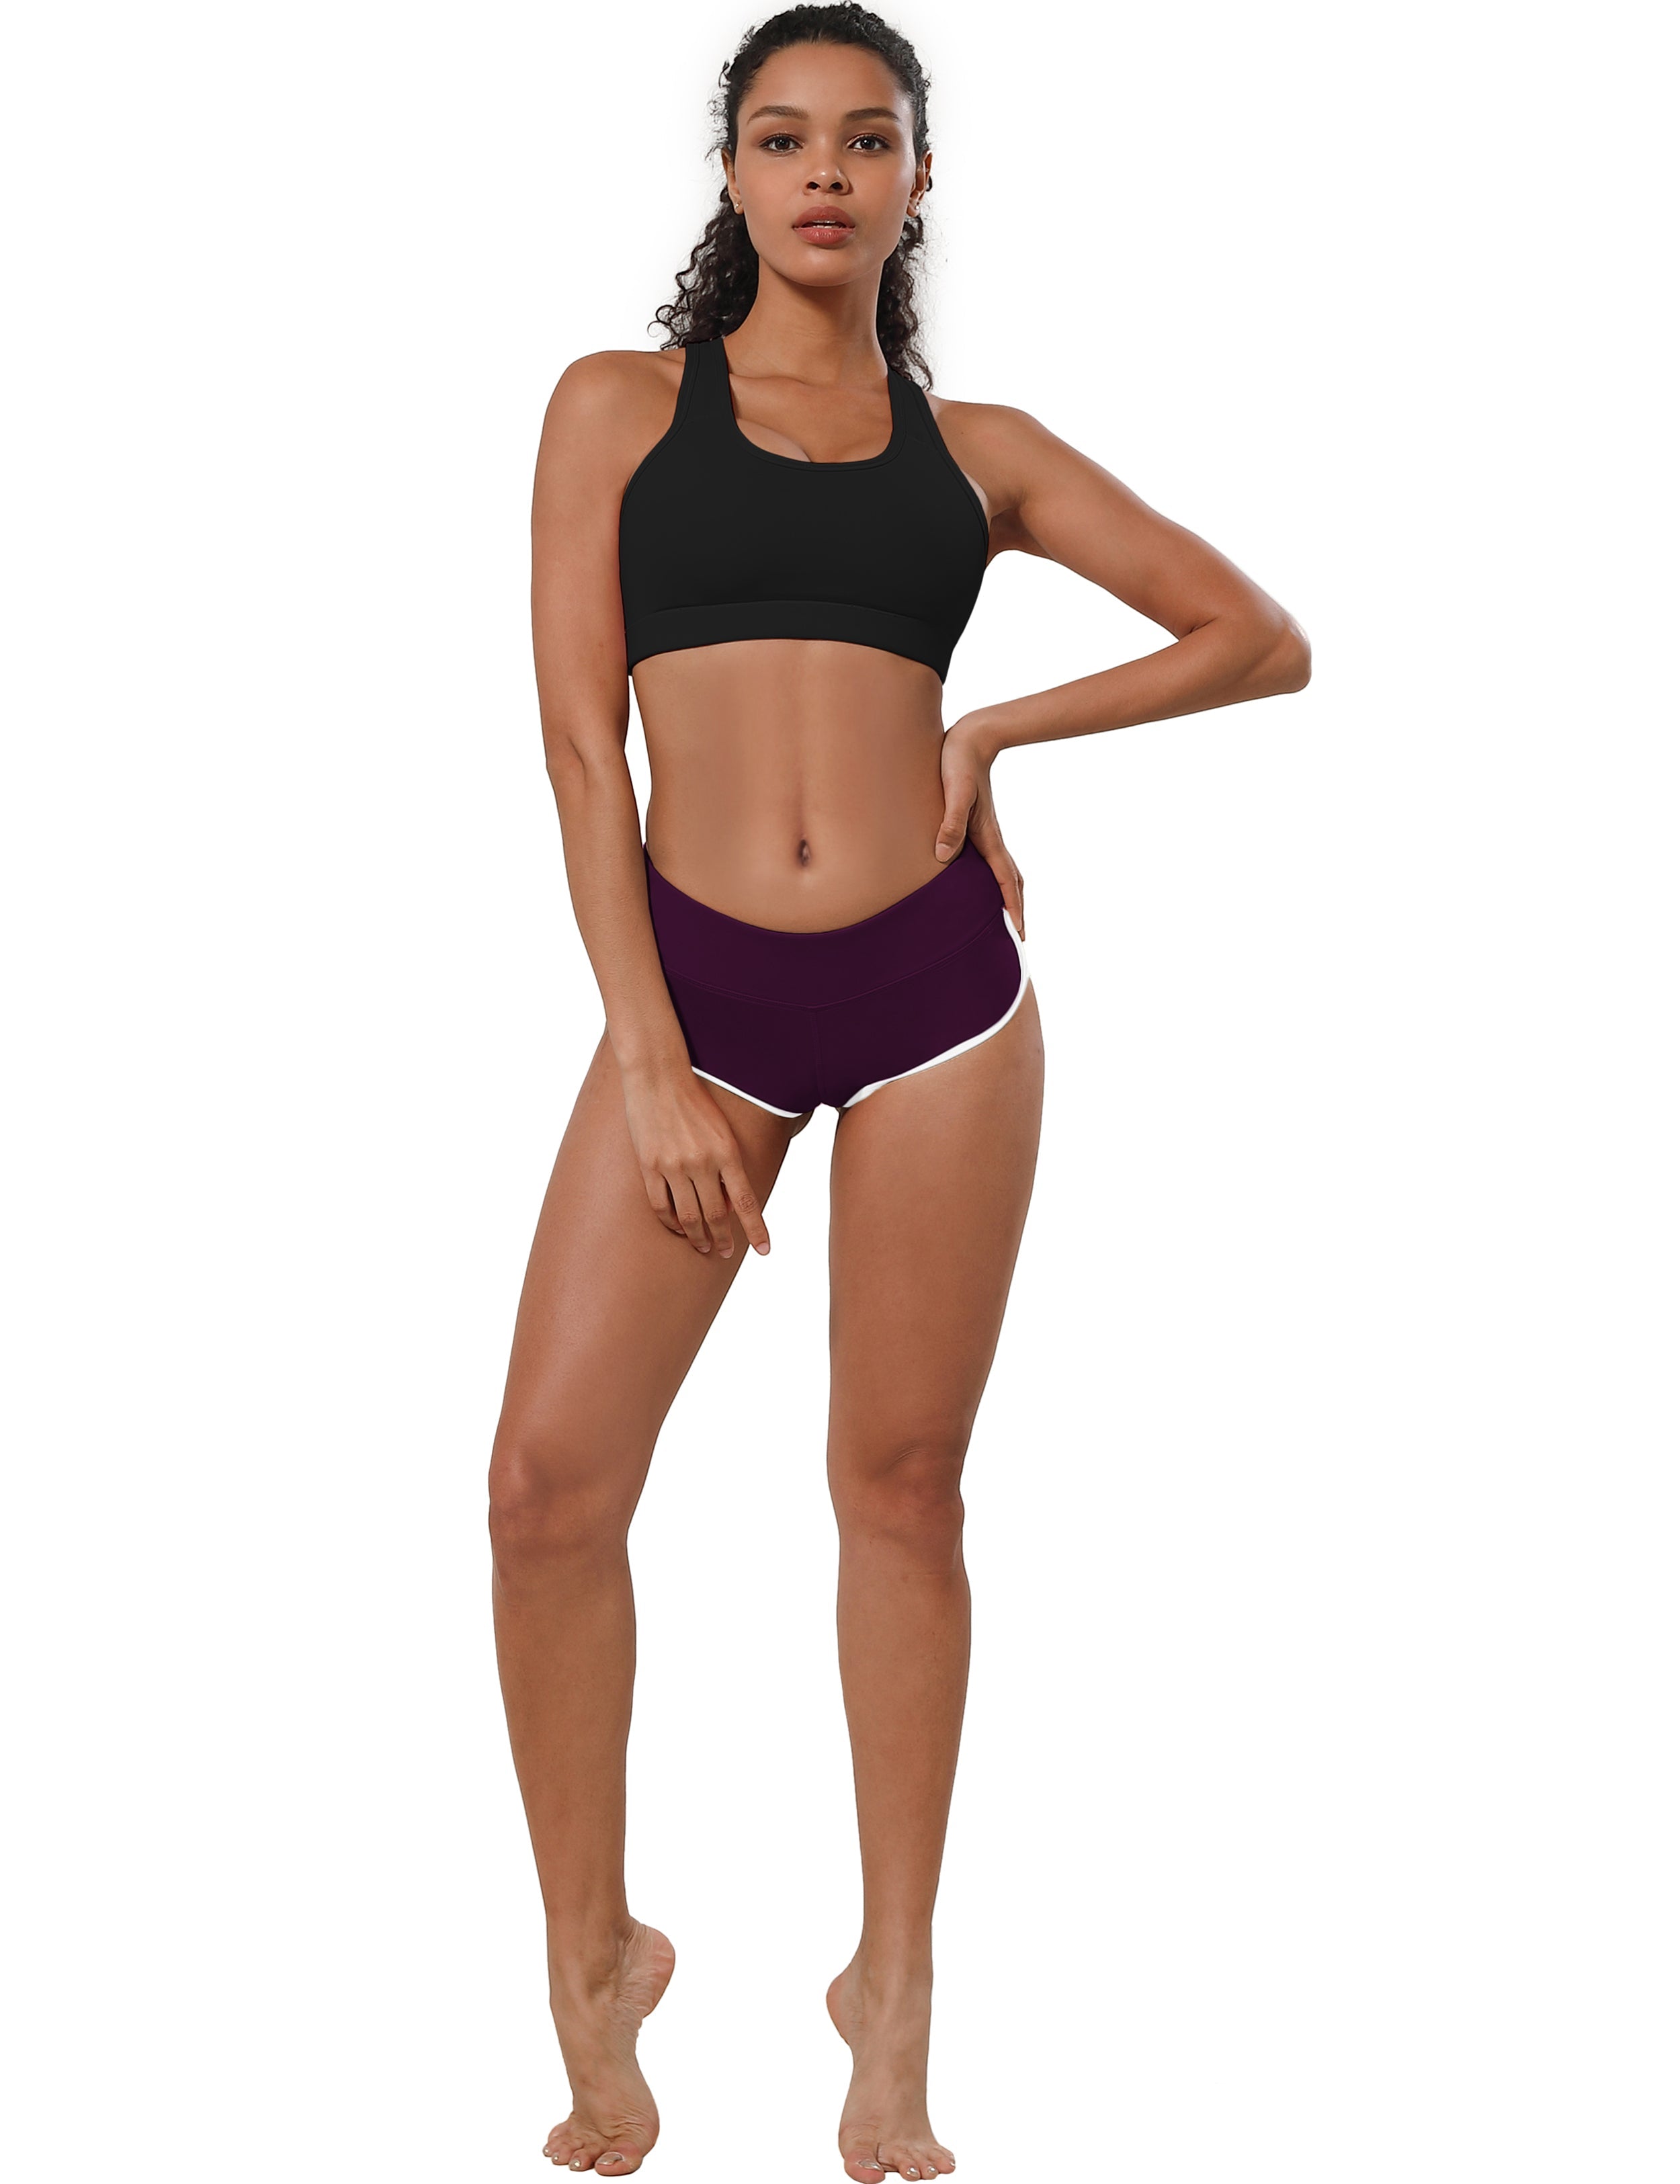 Sexy Booty Pilates Shorts plum Sleek, soft, smooth and totally comfortable: our newest sexy style is here. Softest-ever fabric High elasticity High density 4-way stretch Fabric doesn't attract lint easily No see-through Moisture-wicking Machine wash 75%Nylon/25%Spandex